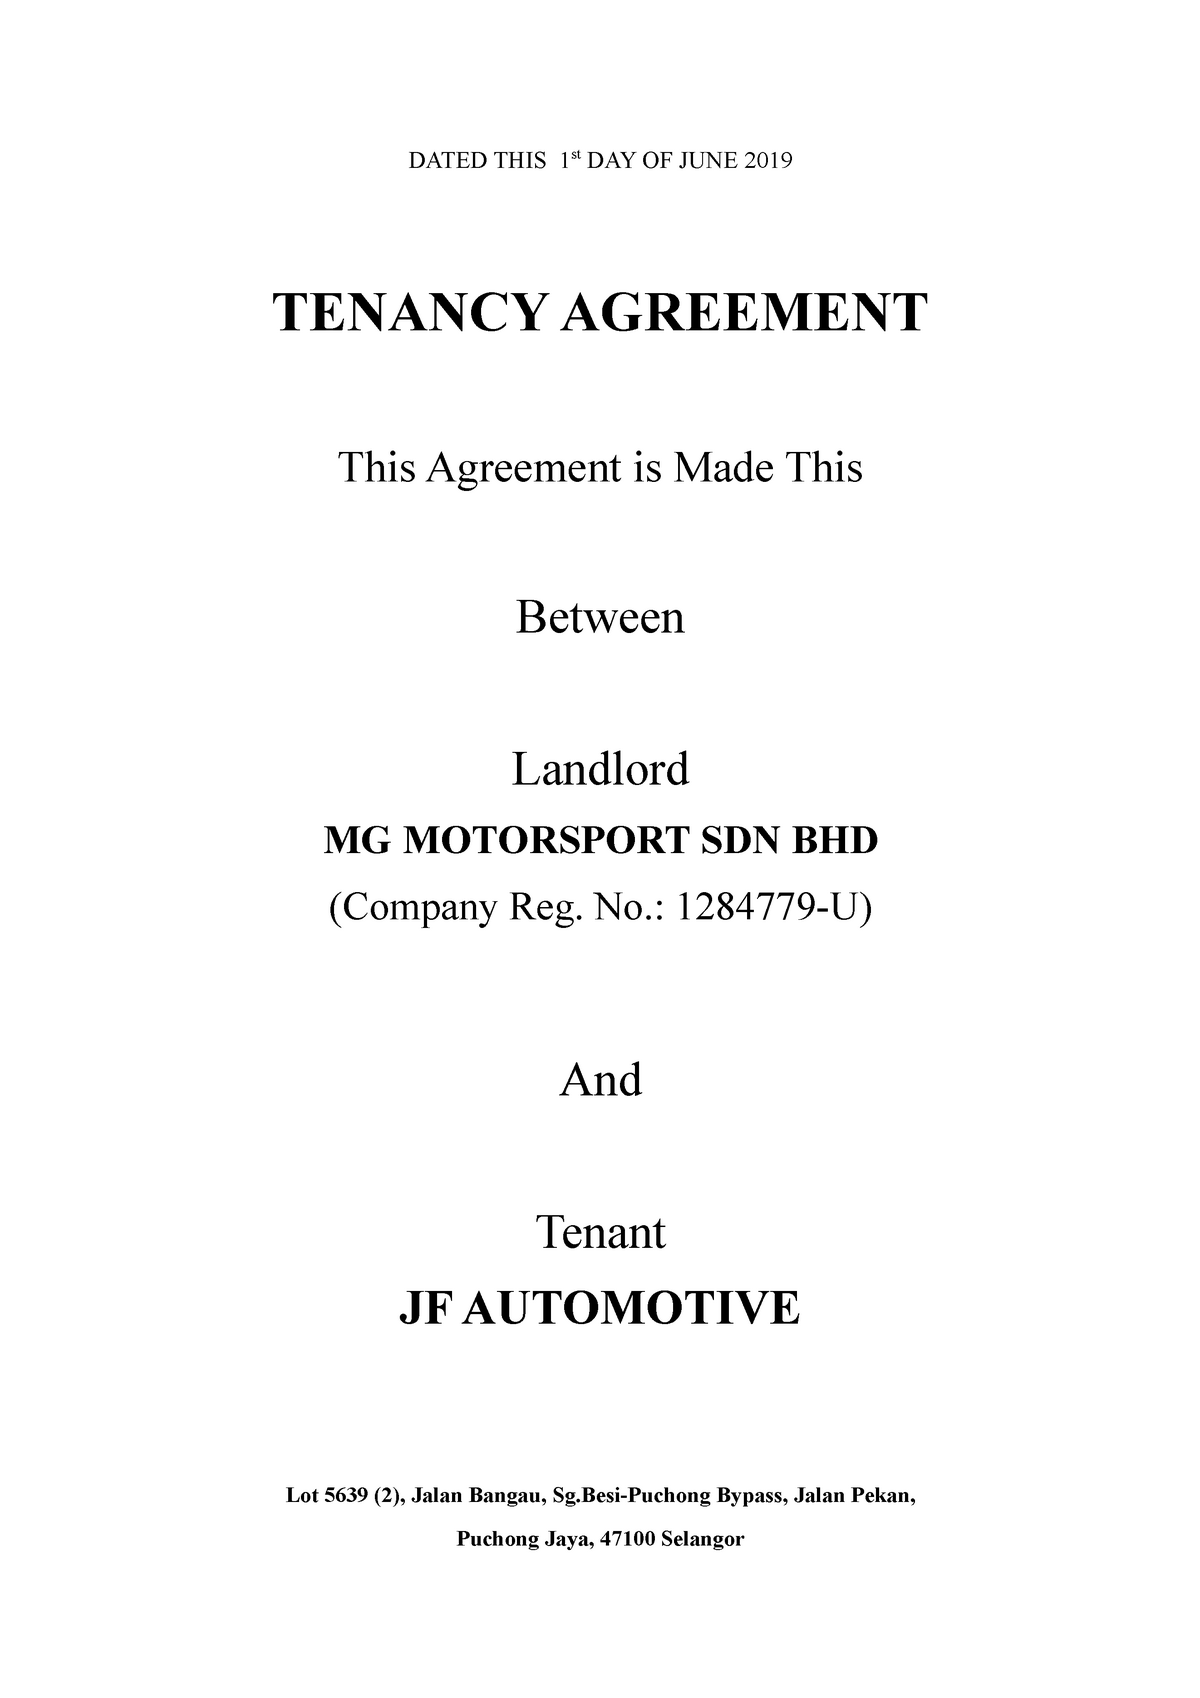 tenancy-agreement-draft-dated-this-1st-day-of-june-2019-tenancy